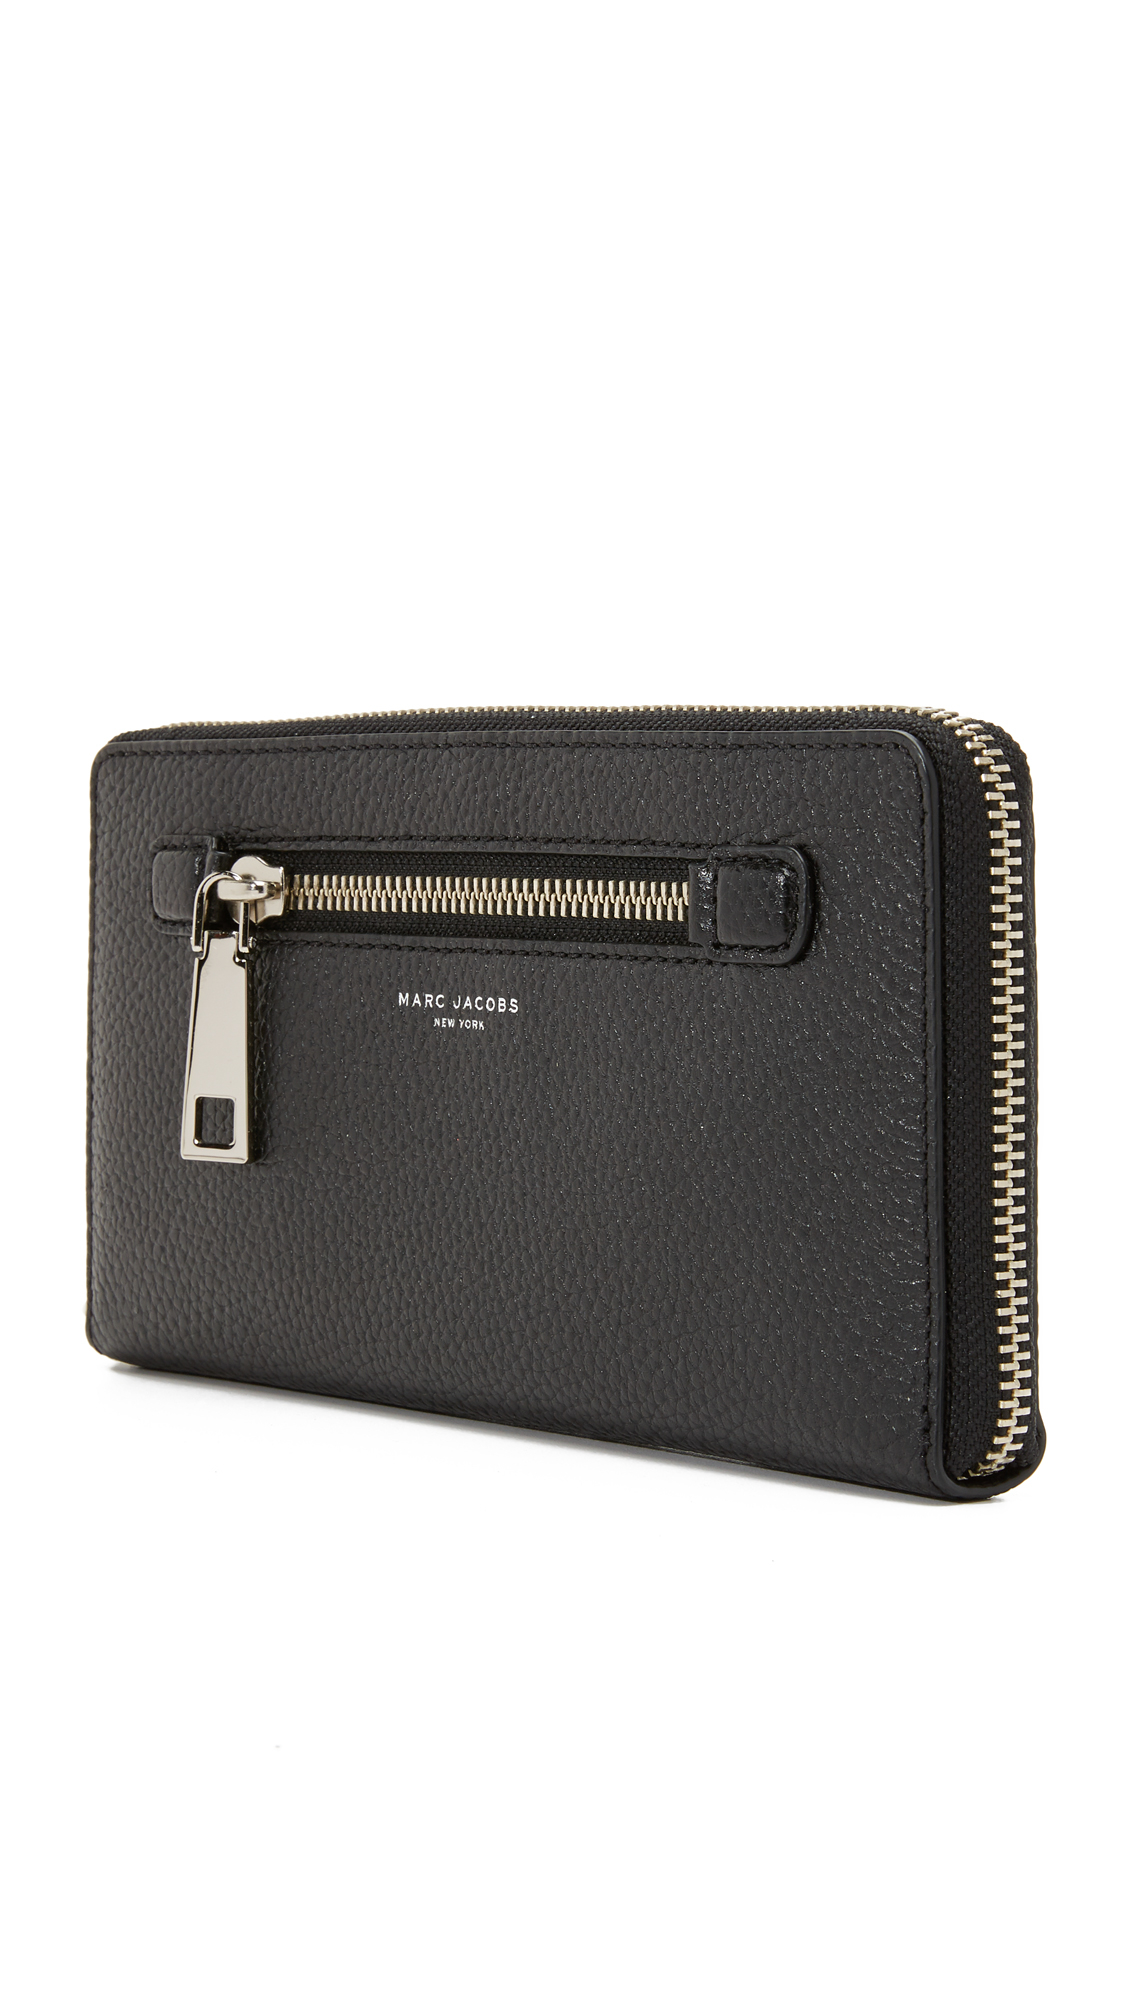 Marc Jacobs Leather Gotham Travel Wallet in Black - Lyst